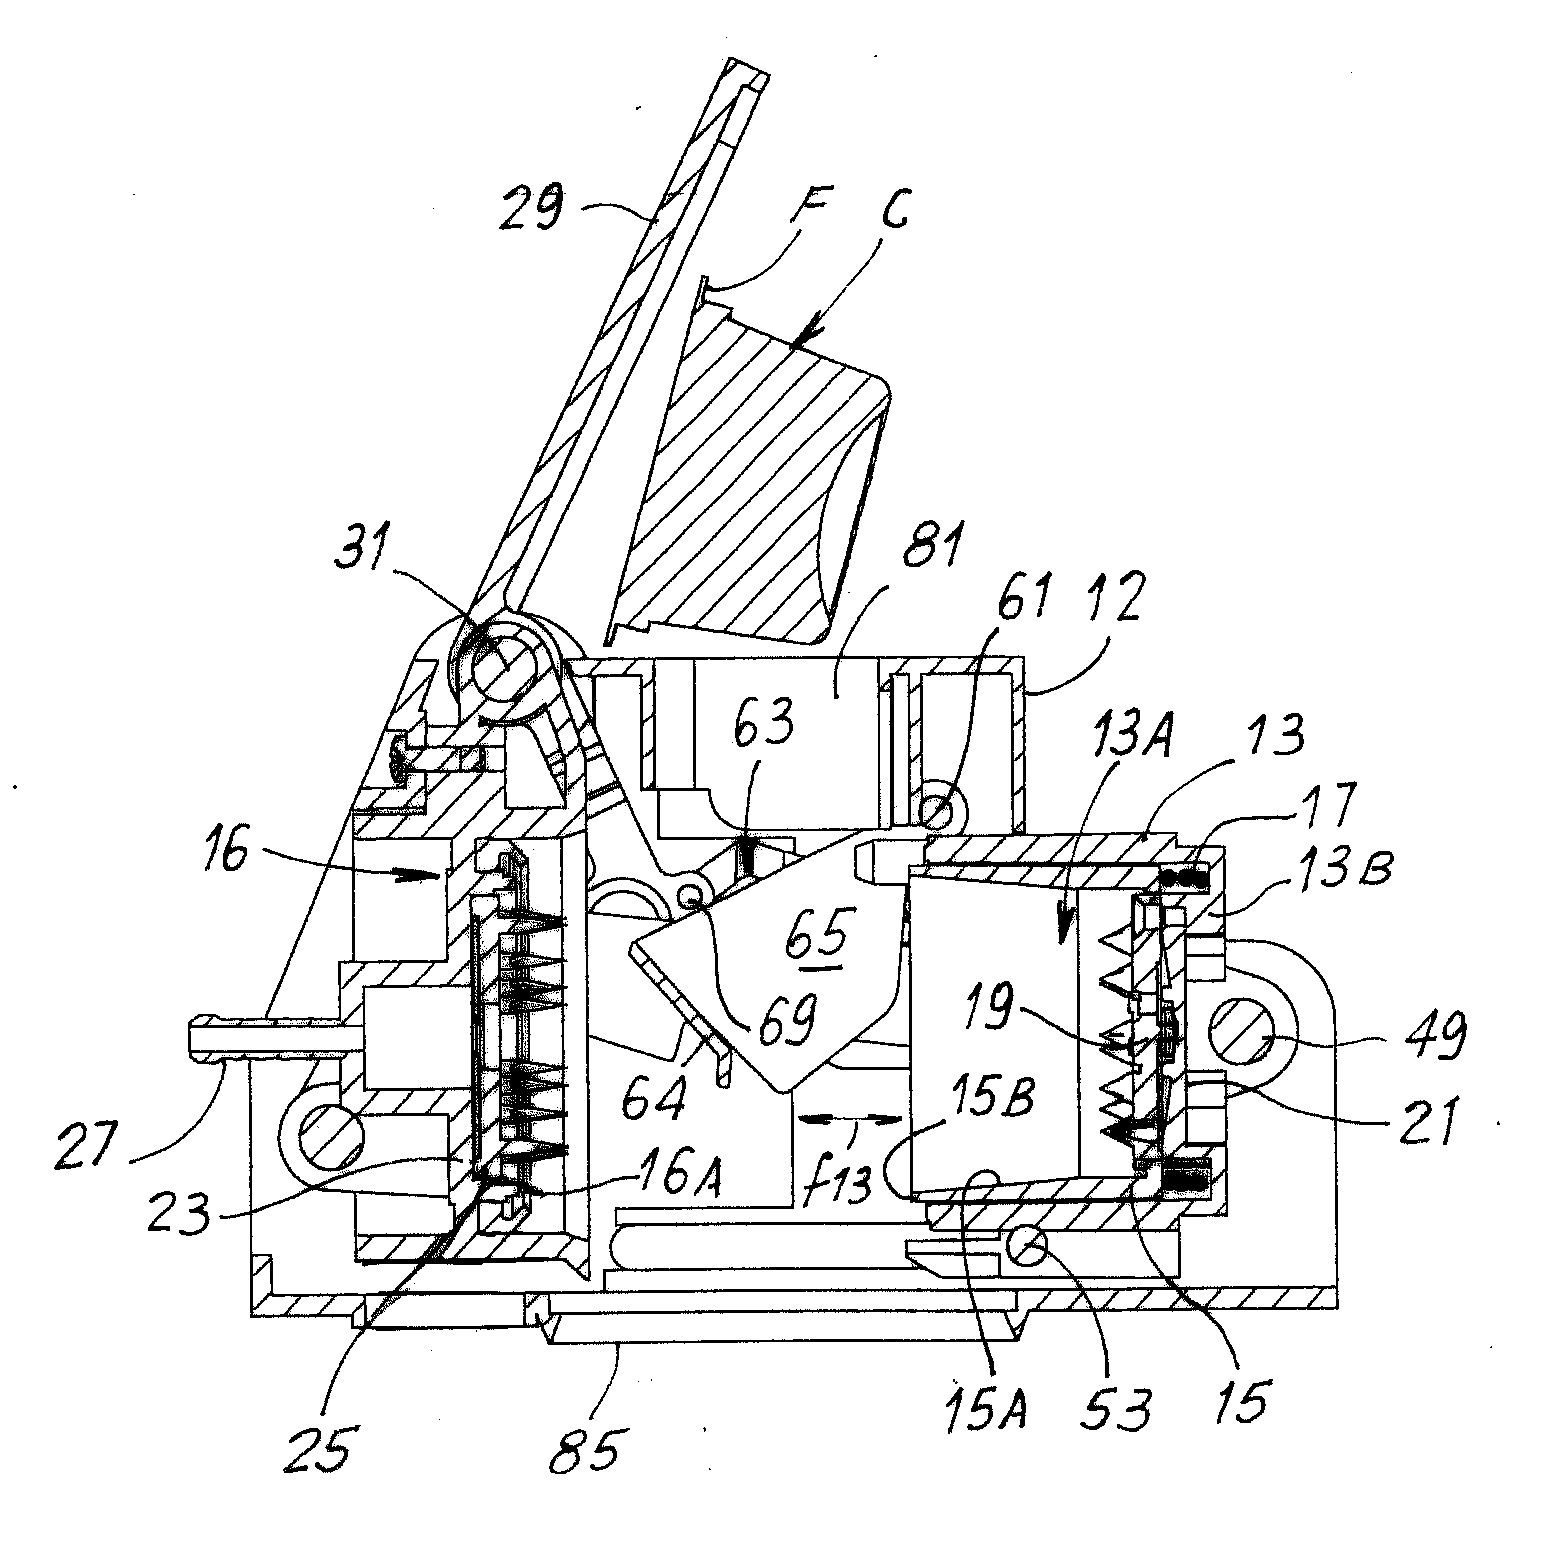 Brewing unit with horizontal motion